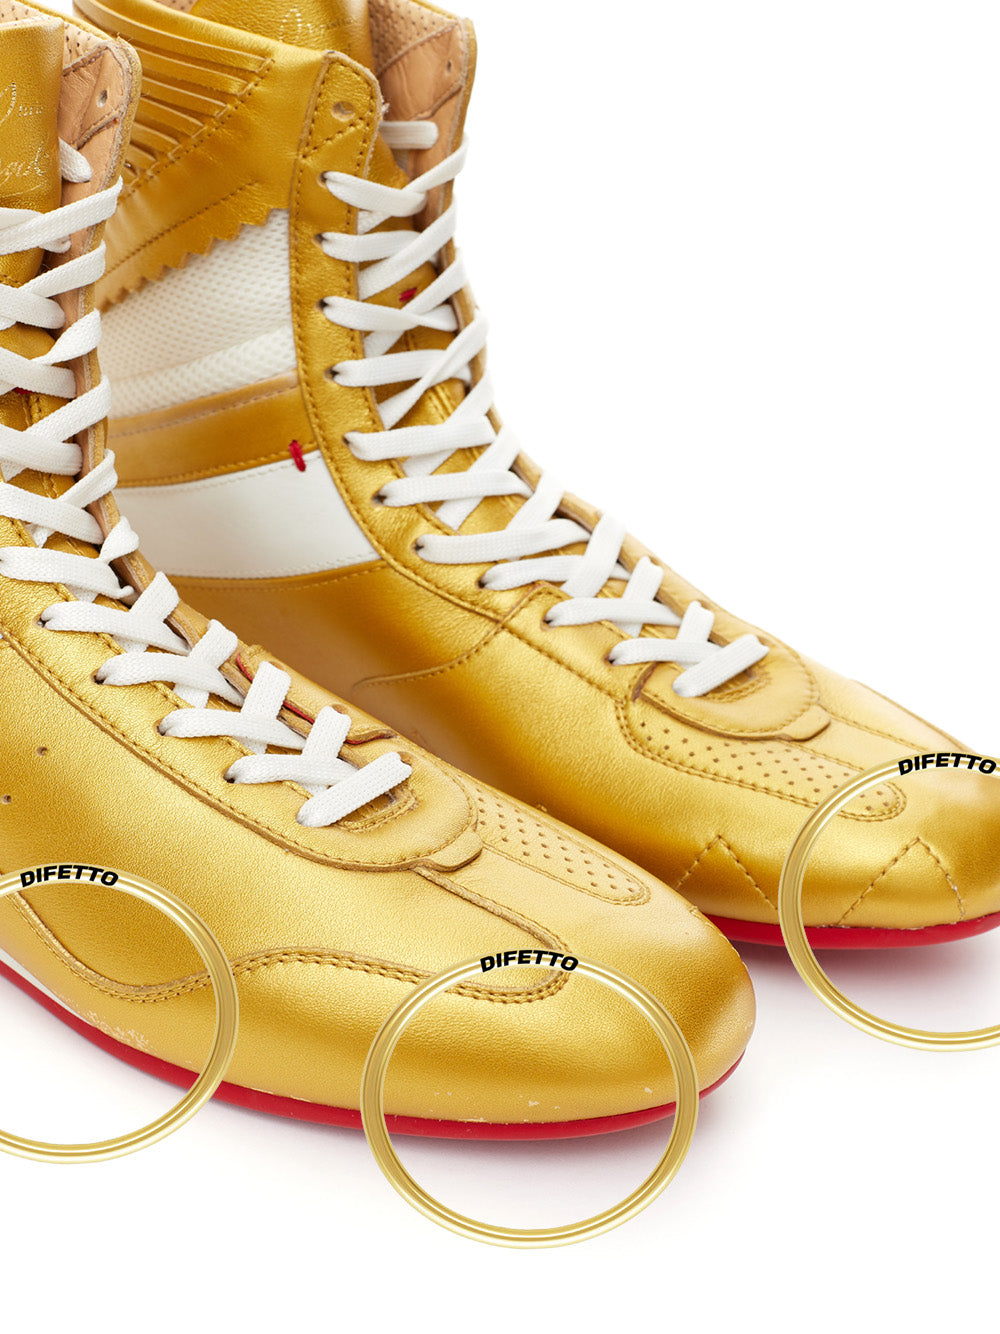 Gold Boxeur Sneakers with Fringes Christian Louboutin